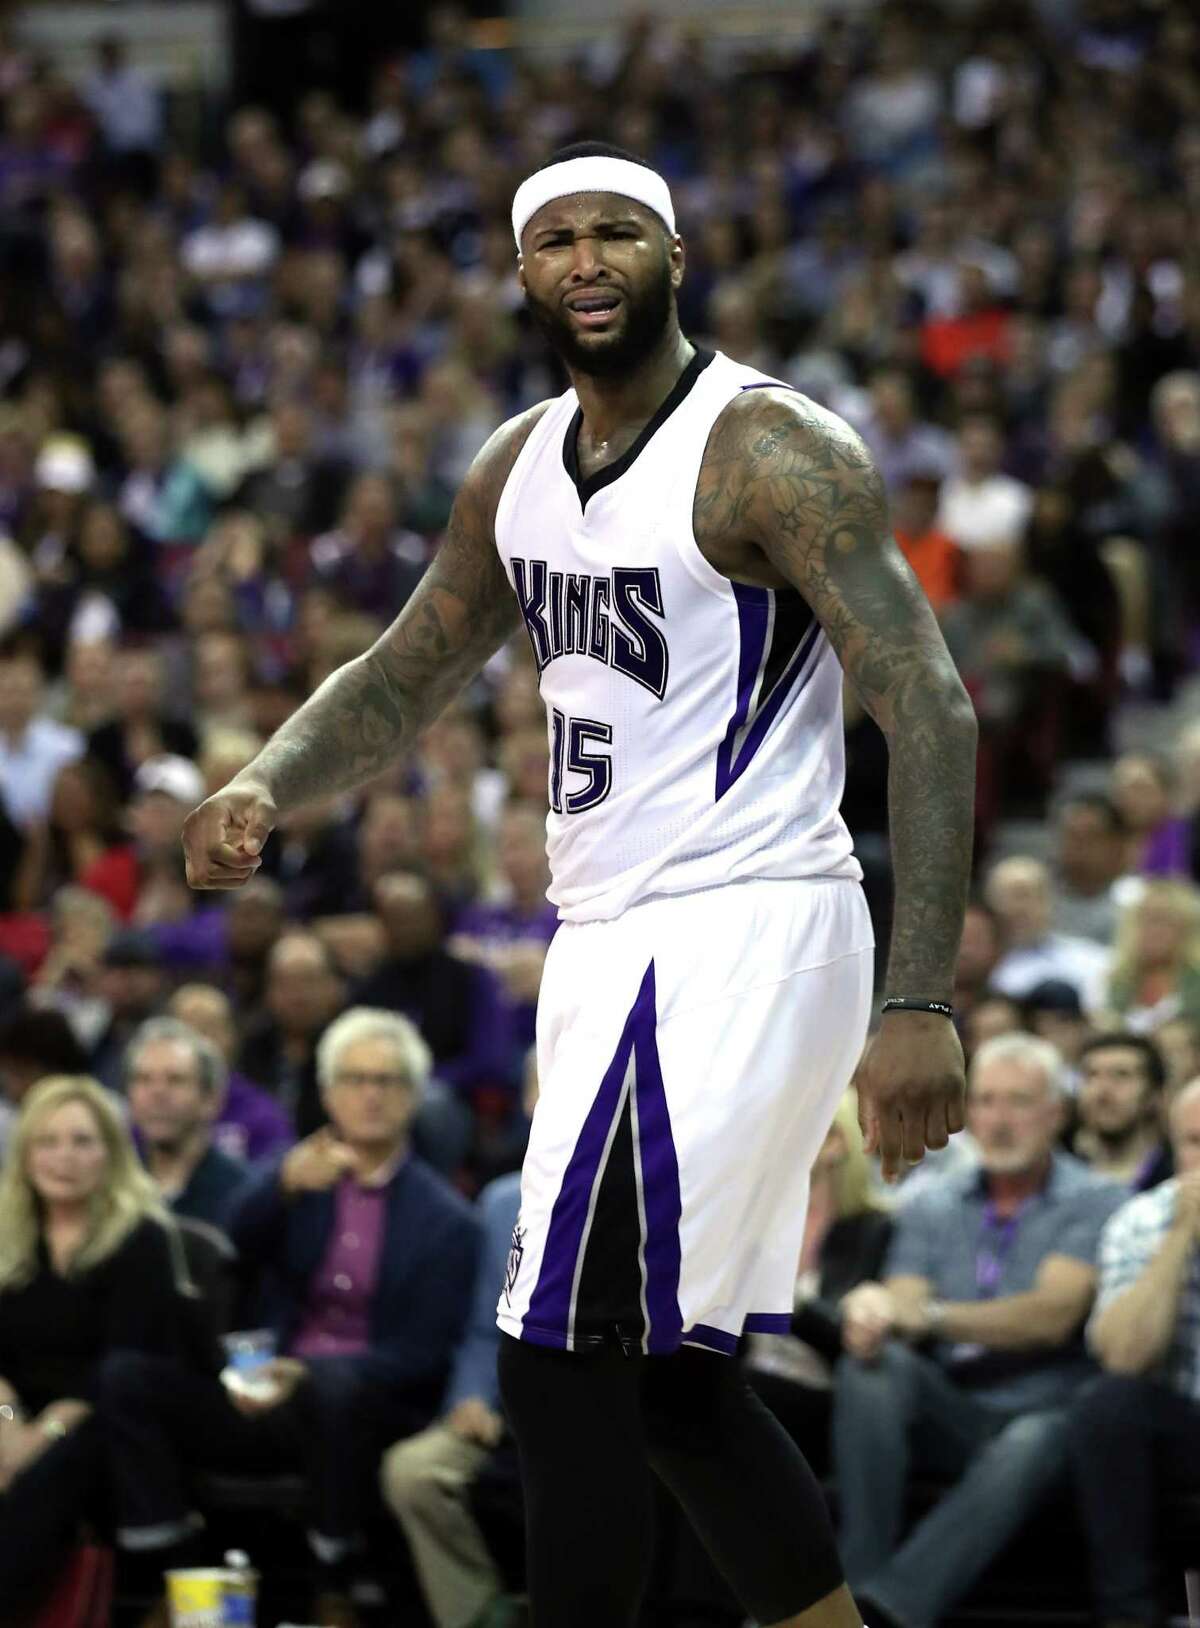 SACRAMENTO, CA - FEBRUARY 24: DeMarcus Cousins #15 of the Sacramento Kings complains about a call during their game against the San Antonio Spurs at Sleep Train Arena on February 24, 2016 in Sacramento, California. NOTE TO USER: User expressly acknowledges and agrees that, by downloading and or using this photograph, User is consenting to the terms and conditions of the Getty Images License Agreement.